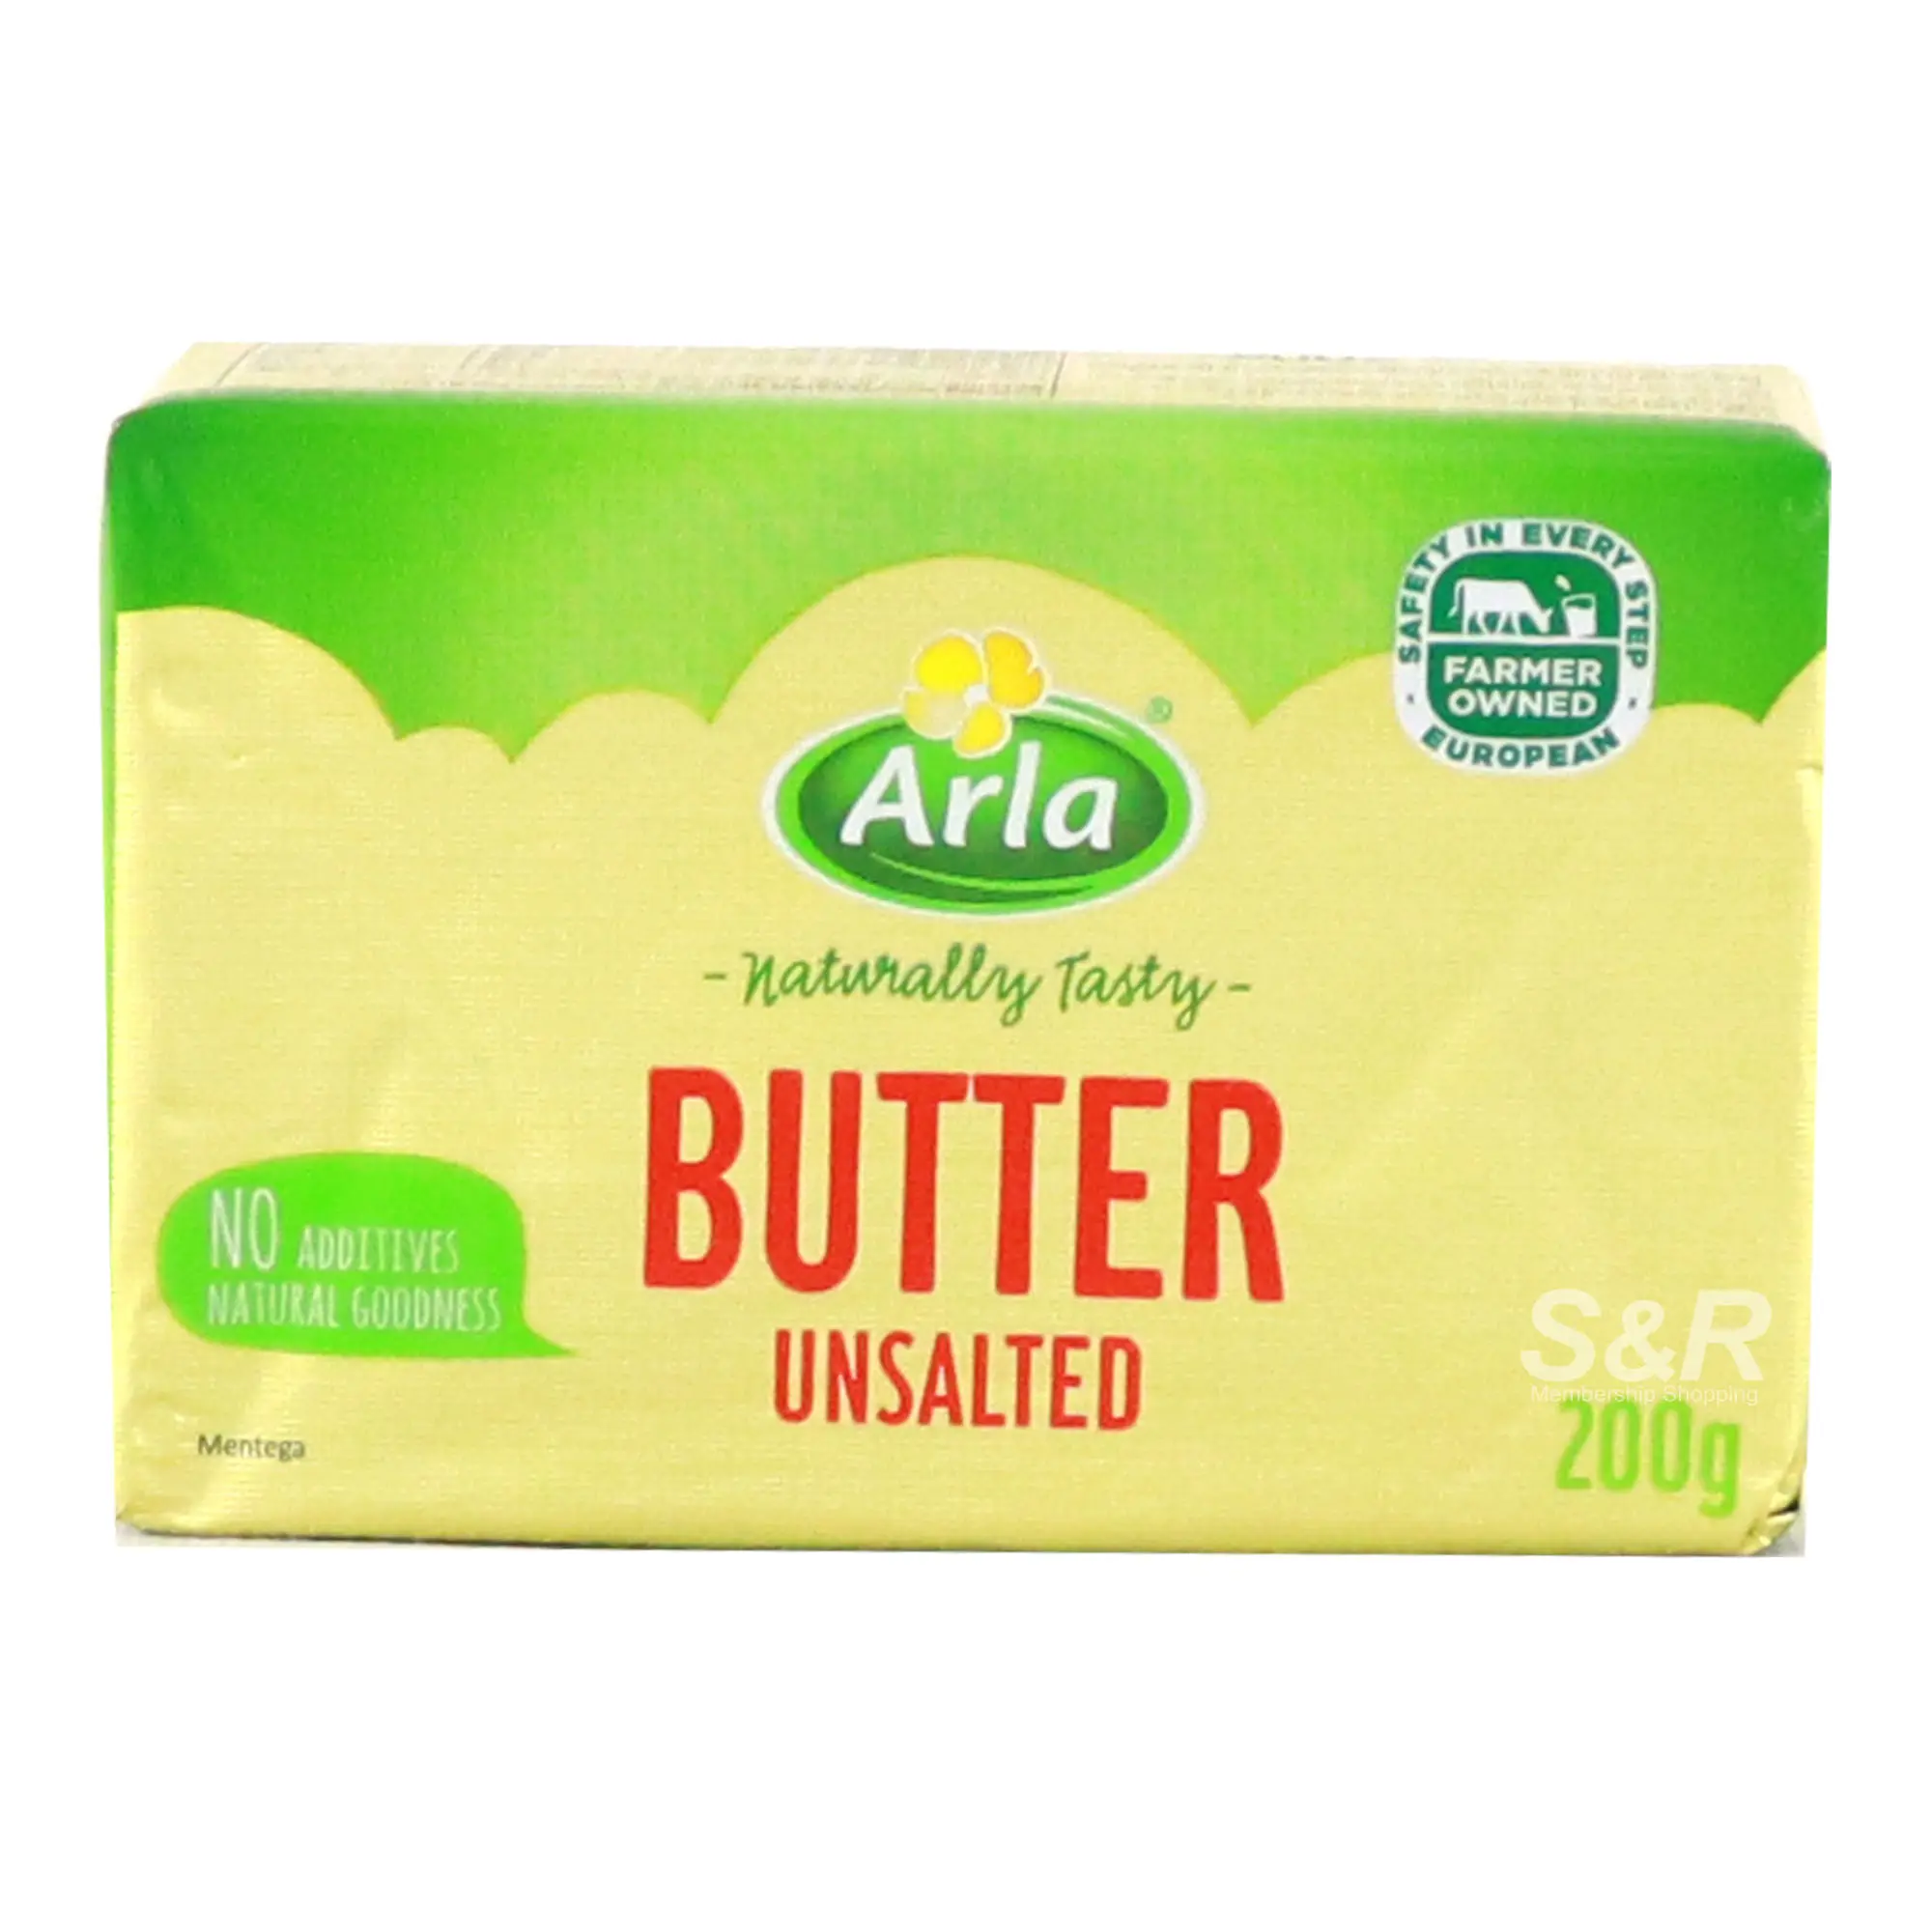 Pure Cow Ghee Butter /Rich Quality Pure Cow Ghee